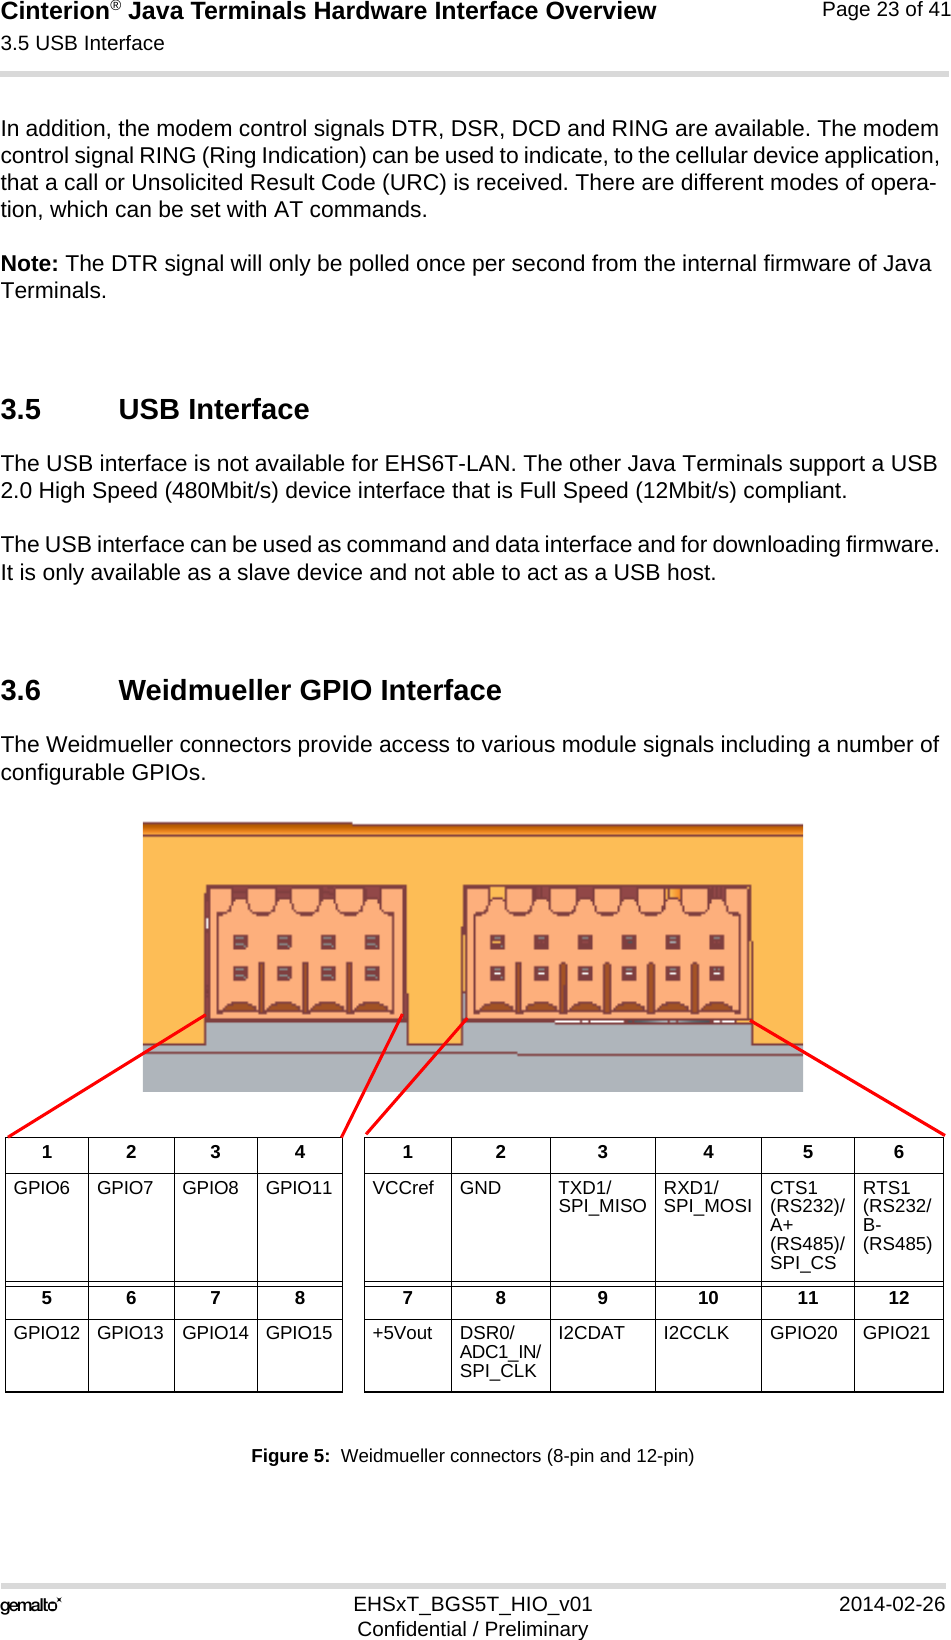 Cinterion® Java Terminals Hardware Interface Overview3.5 USB Interface32EHSxT_BGS5T_HIO_v01 2014-02-26Confidential / PreliminaryPage 23 of 41In addition, the modem control signals DTR, DSR, DCD and RING are available. The modem control signal RING (Ring Indication) can be used to indicate, to the cellular device application, that a call or Unsolicited Result Code (URC) is received. There are different modes of opera-tion, which can be set with AT commands.Note: The DTR signal will only be polled once per second from the internal firmware of Java Terminals.3.5 USB InterfaceThe USB interface is not available for EHS6T-LAN. The other Java Terminals support a USB 2.0 High Speed (480Mbit/s) device interface that is Full Speed (12Mbit/s) compliant. The USB interface can be used as command and data interface and for downloading firmware. It is only available as a slave device and not able to act as a USB host. 3.6 Weidmueller GPIO InterfaceThe Weidmueller connectors provide access to various module signals including a number of configurable GPIOs.Figure 5:  Weidmueller connectors (8-pin and 12-pin)1234 1 2 3 4 5 6GPIO6 GPIO7 GPIO8 GPIO11 VCCref GND TXD1/SPI_MISO RXD1/SPI_MOSI CTS1(RS232)/A+(RS485)/SPI_CSRTS1(RS232/B-(RS485)5678 7 8 9 10 1112GPIO12 GPIO13 GPIO14 GPIO15 +5Vout DSR0/ADC1_IN/SPI_CLKI2CDAT I2CCLK GPIO20 GPIO21